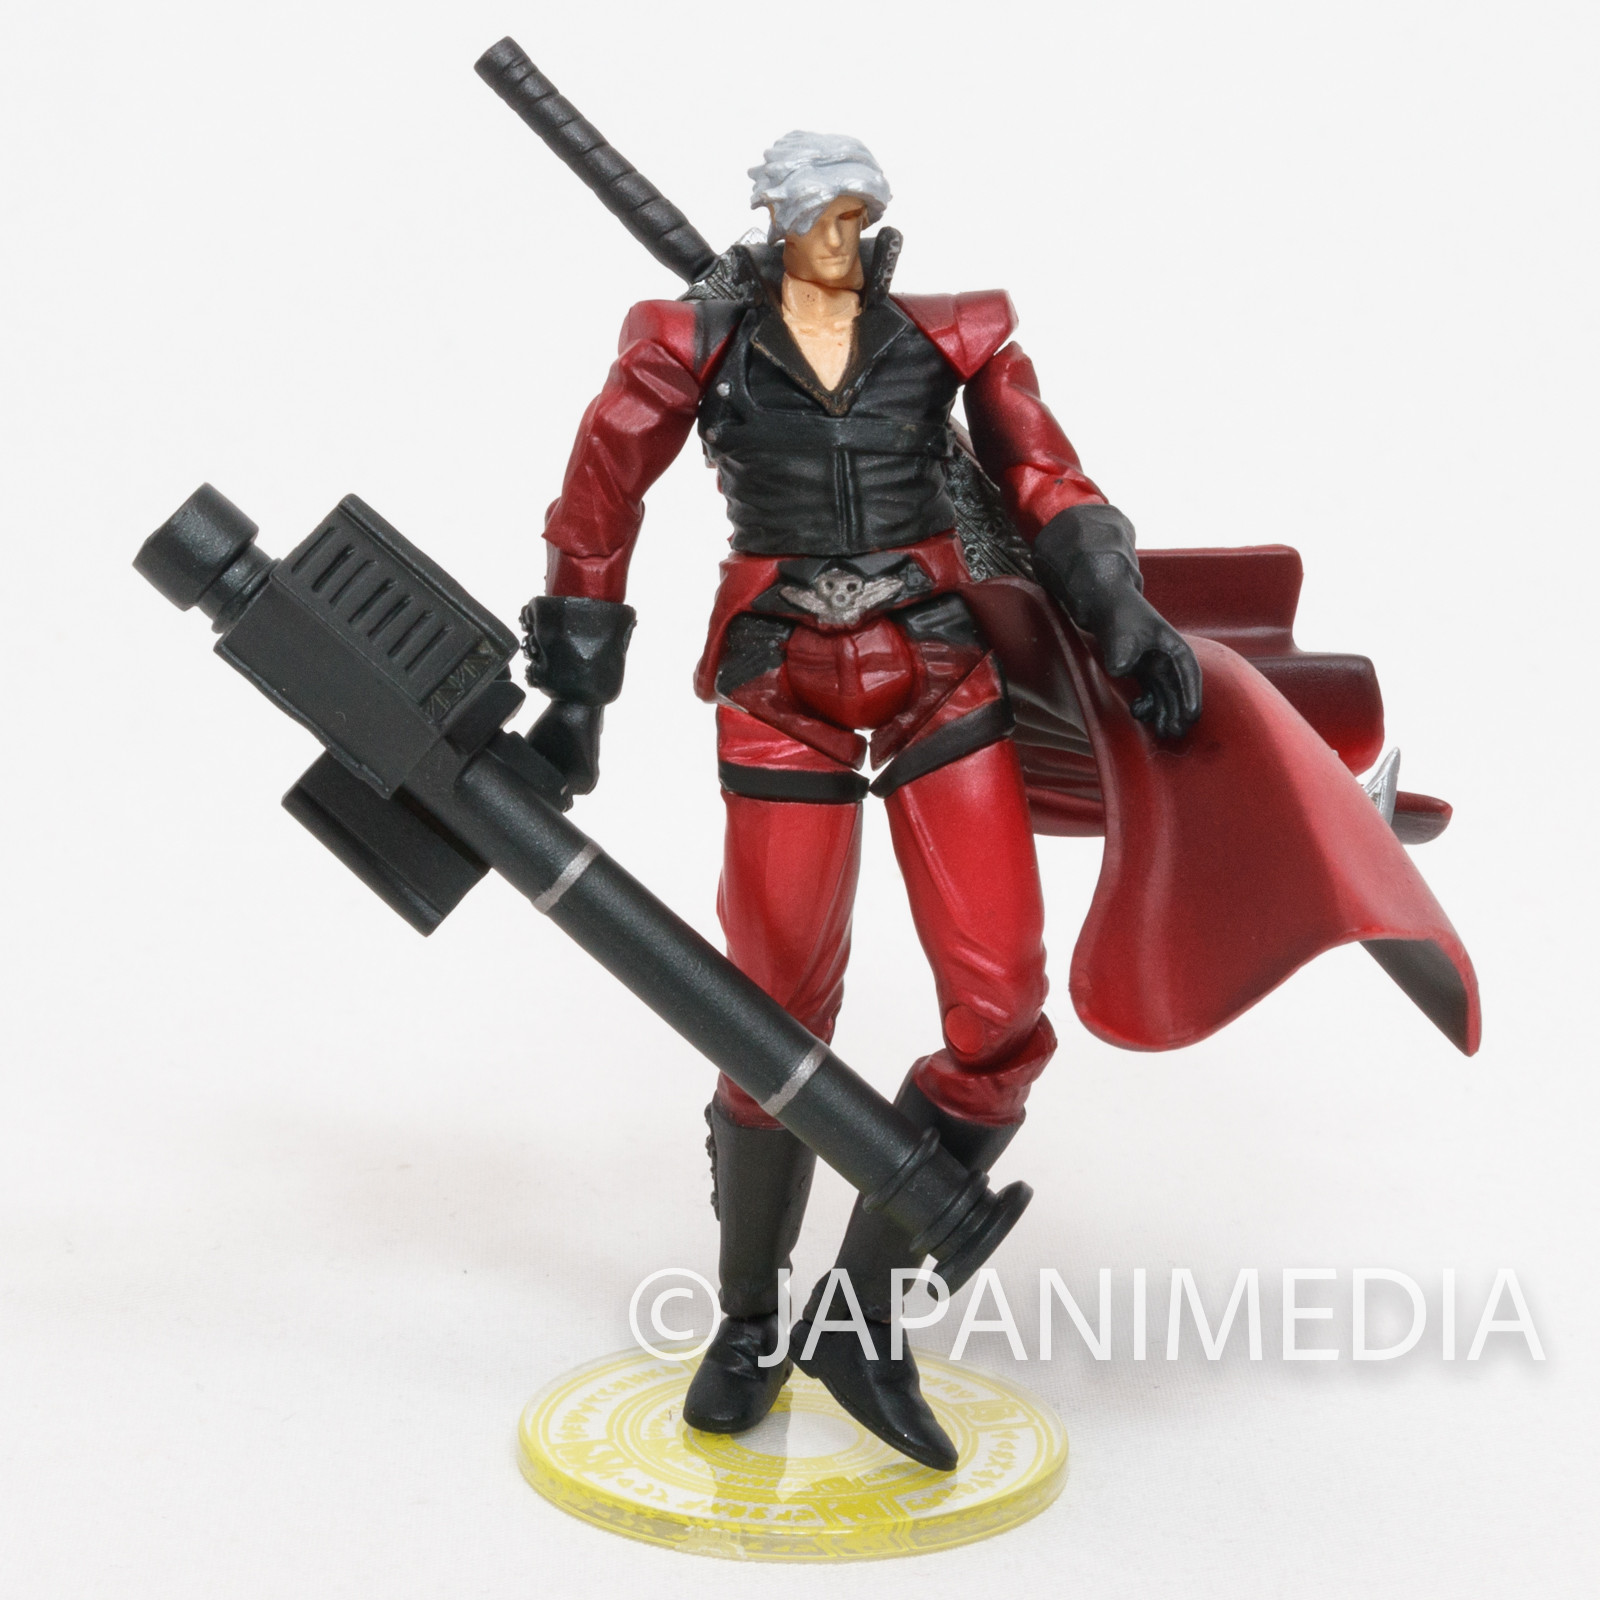 Devil May Cry 2 Dante (B ver.) KT Figure Collection JAPAN GAME -  Japanimedia Store